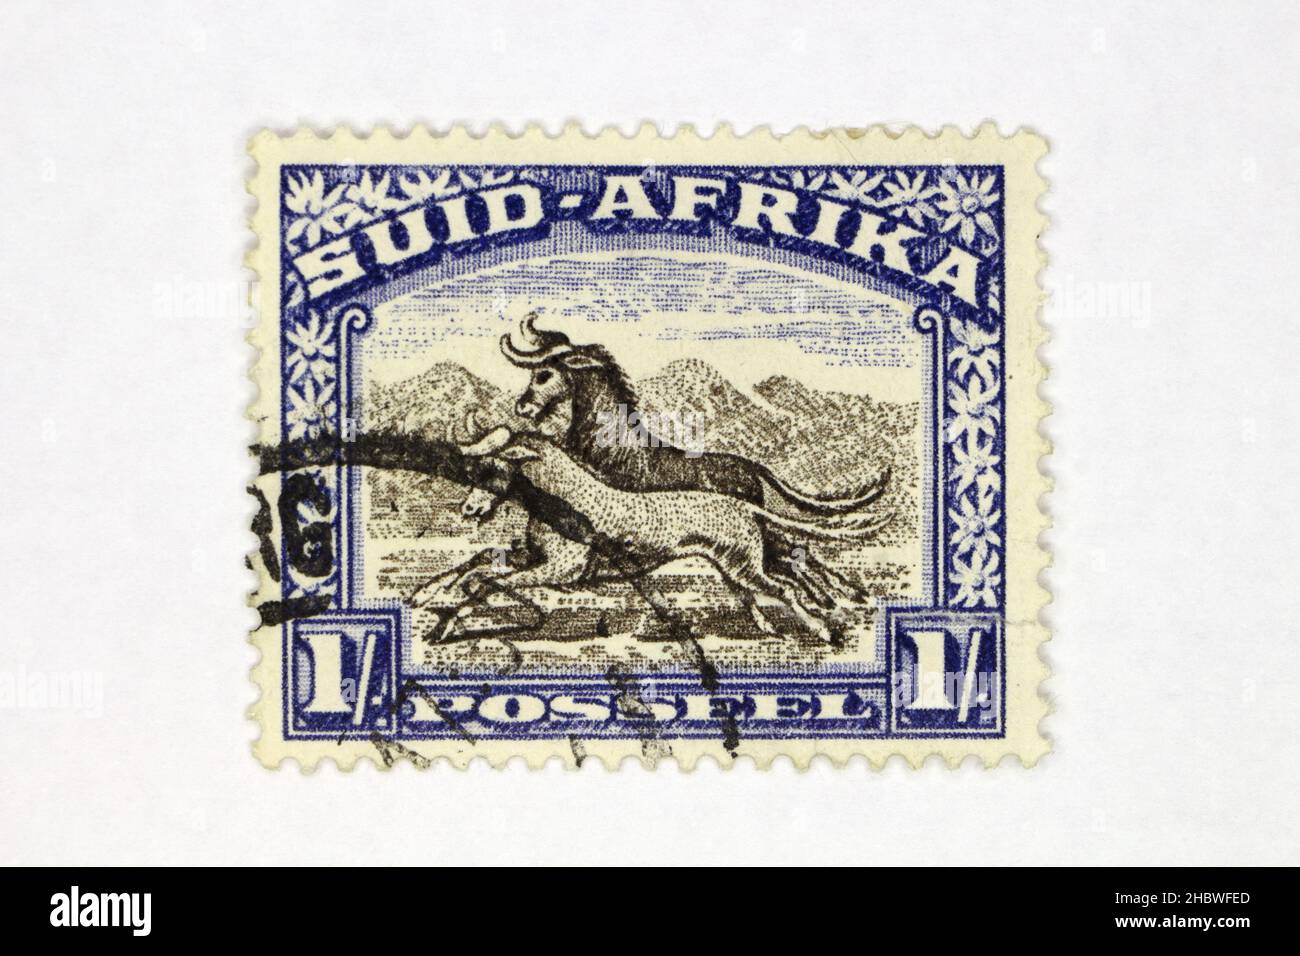 South africa - Suid Afrika postage stamp Stock Photo